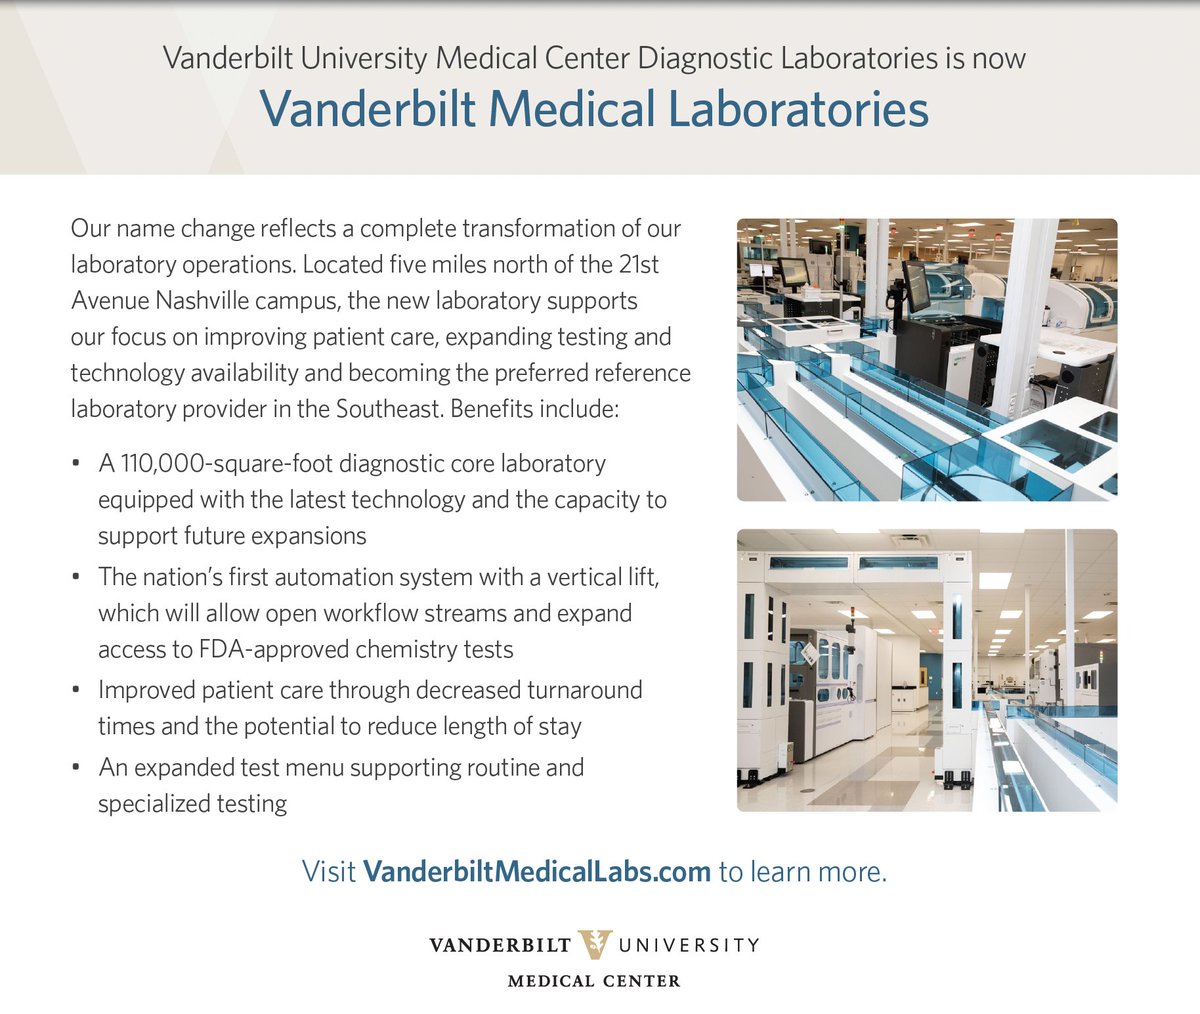 Vanderbilt Medical Labs is official! A true testament to our commitment to cutting-edge research and healthcare innovation. I am proud of all of our team members in this multi-year effort! @vumcpathology #LabMedX tinyurl.com/5b5zts8a